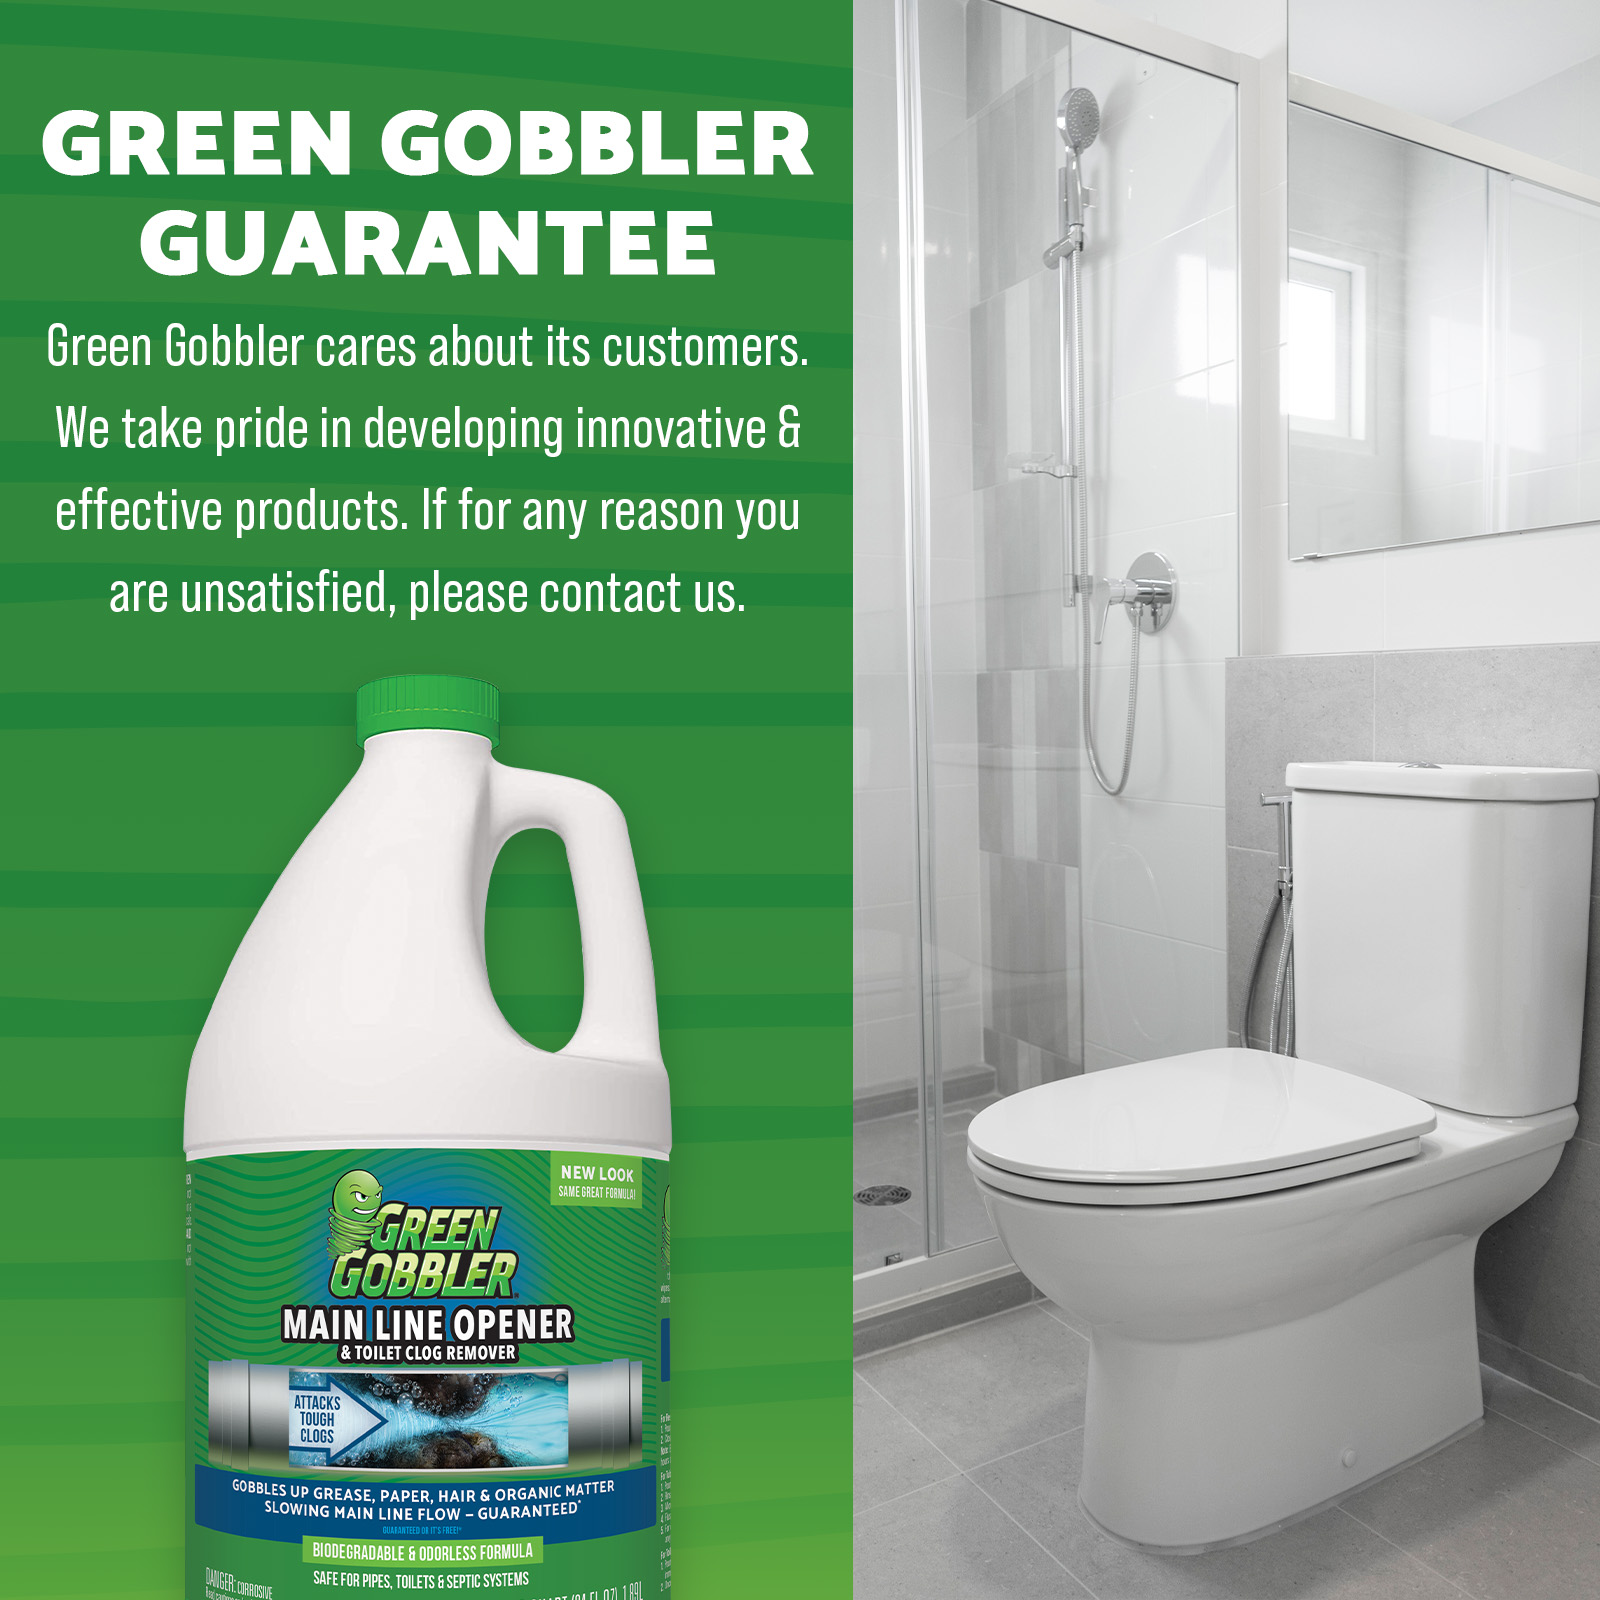 Green Gobbler Ultimate Main Drain Opener | Drain Cleaner Hair Clog Remover | Works On Main Lines, Sinks, Tubs, Toilets, Showers, Kitchen Sinks | 64 fl. oz. - image 4 of 9